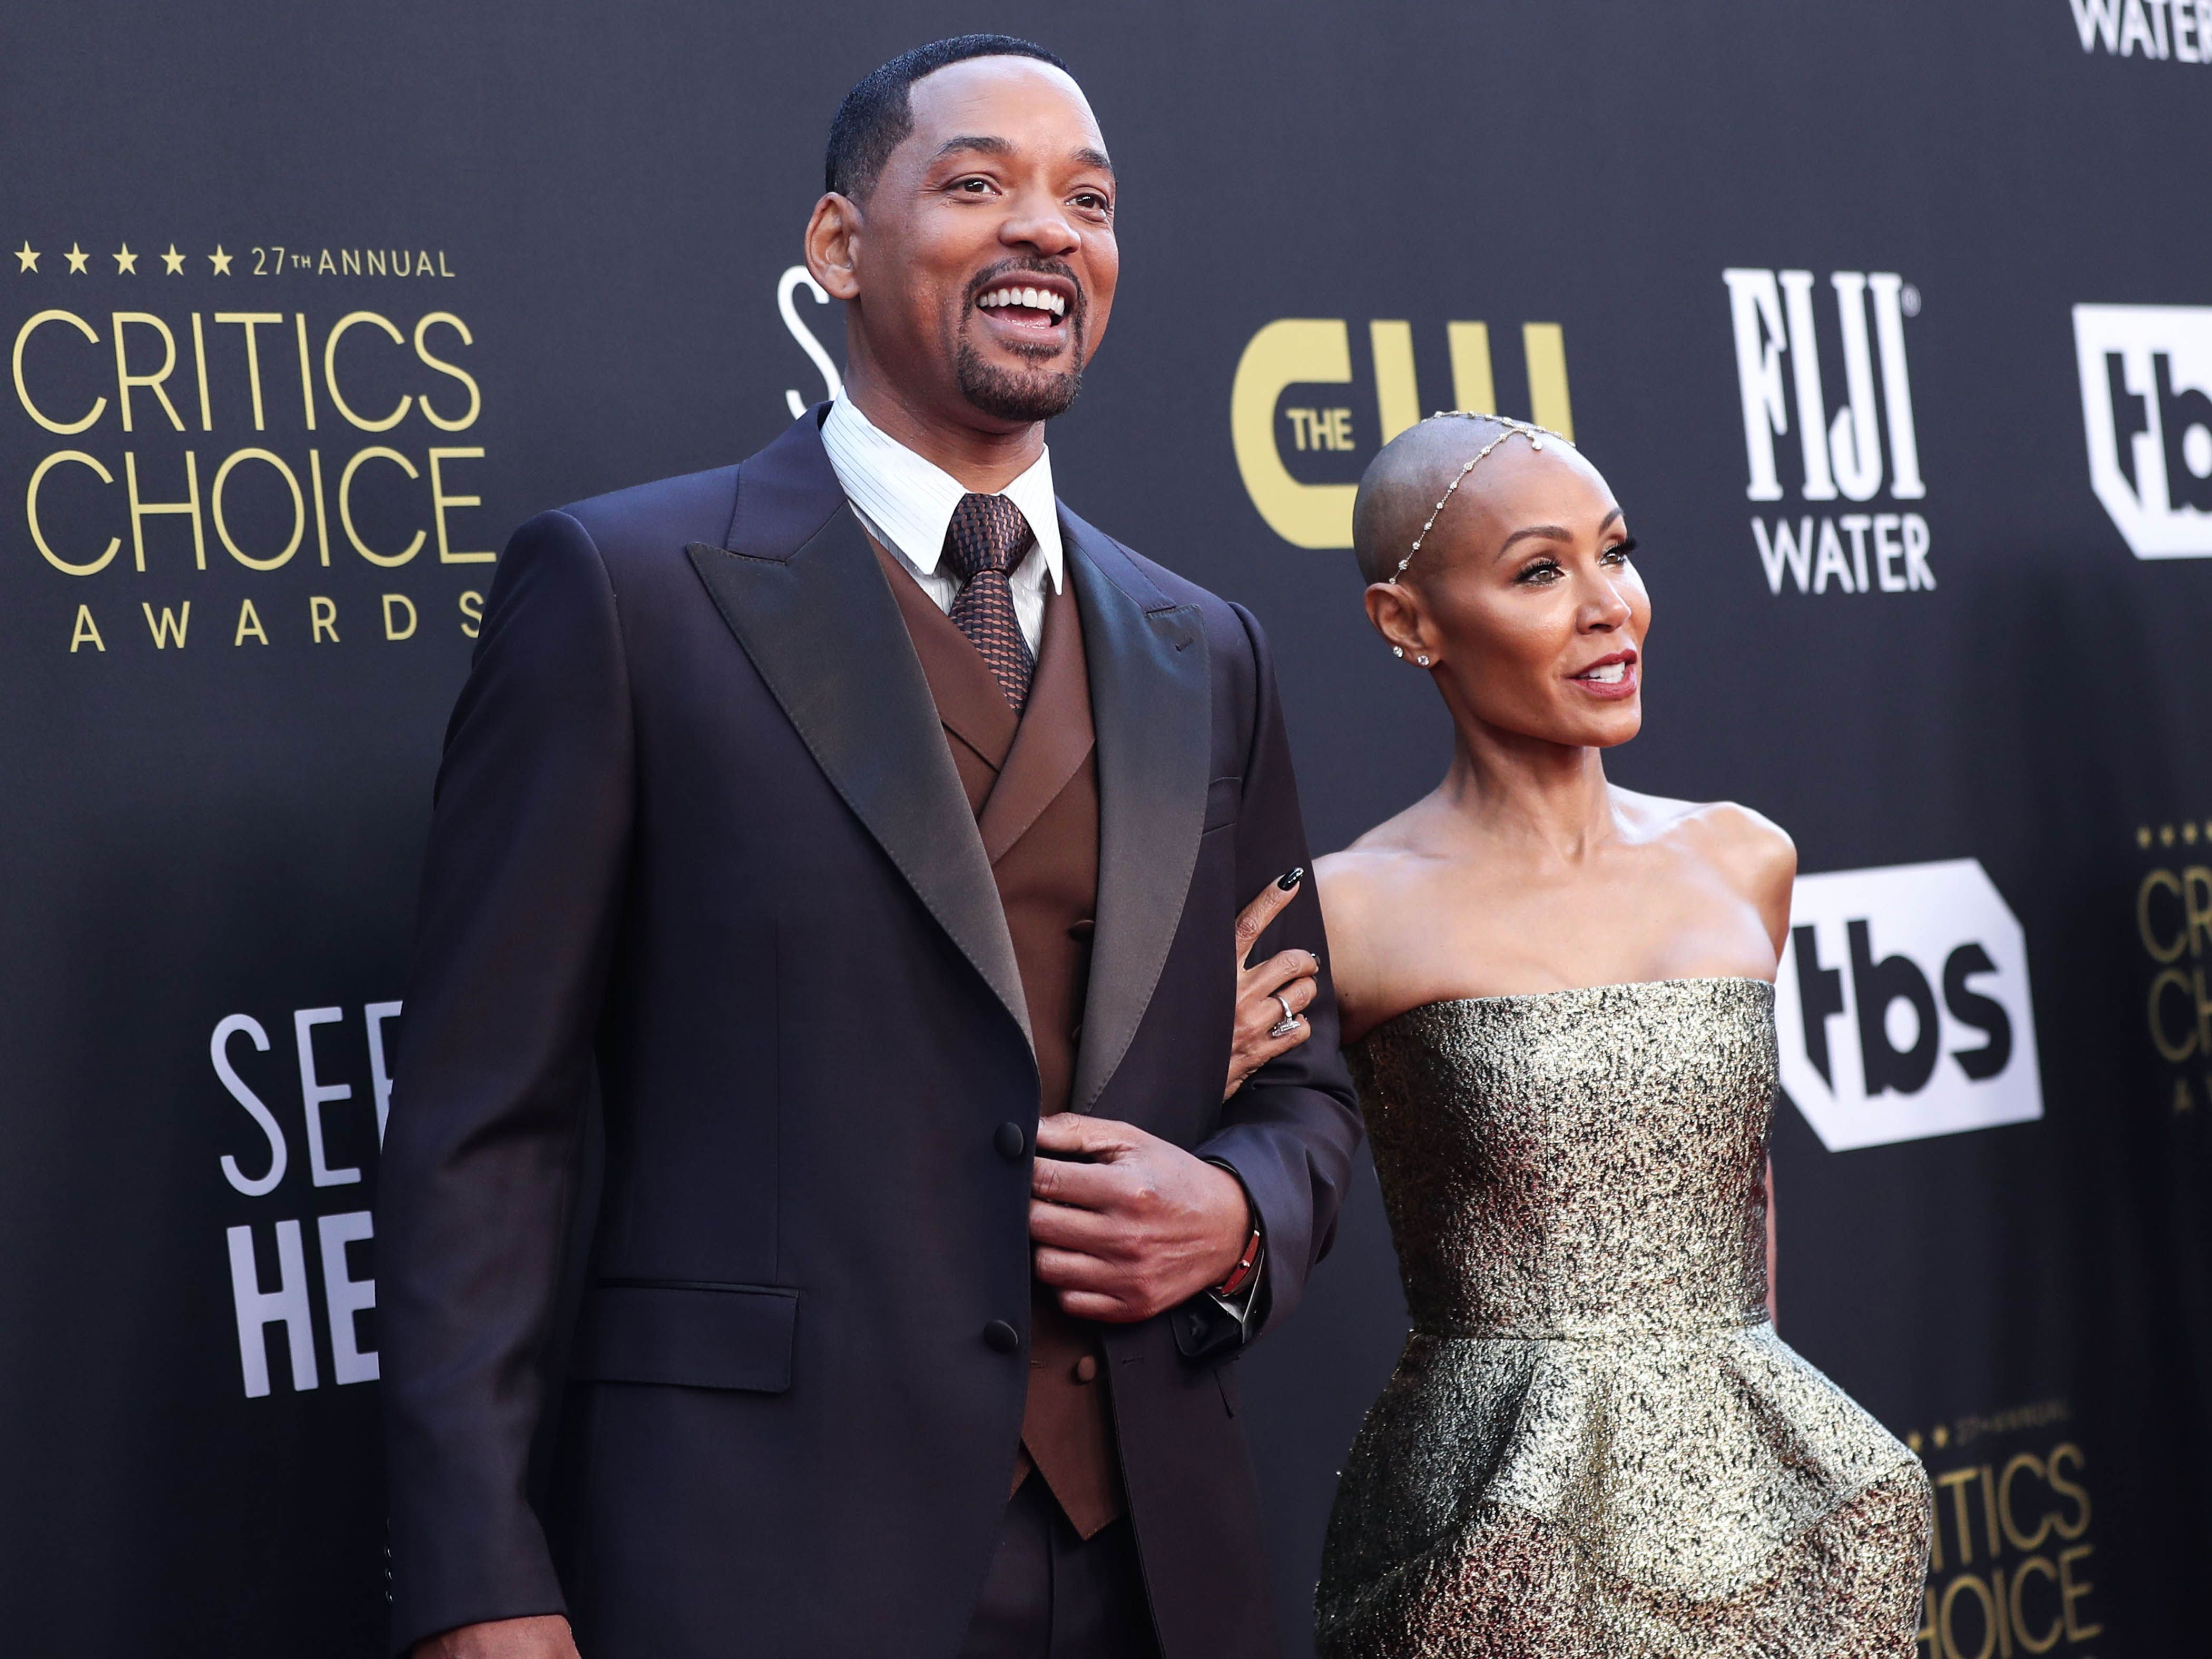 Jada Pinkett Smith & Will Smith are 'unbreakable' after Oscars slap scandal